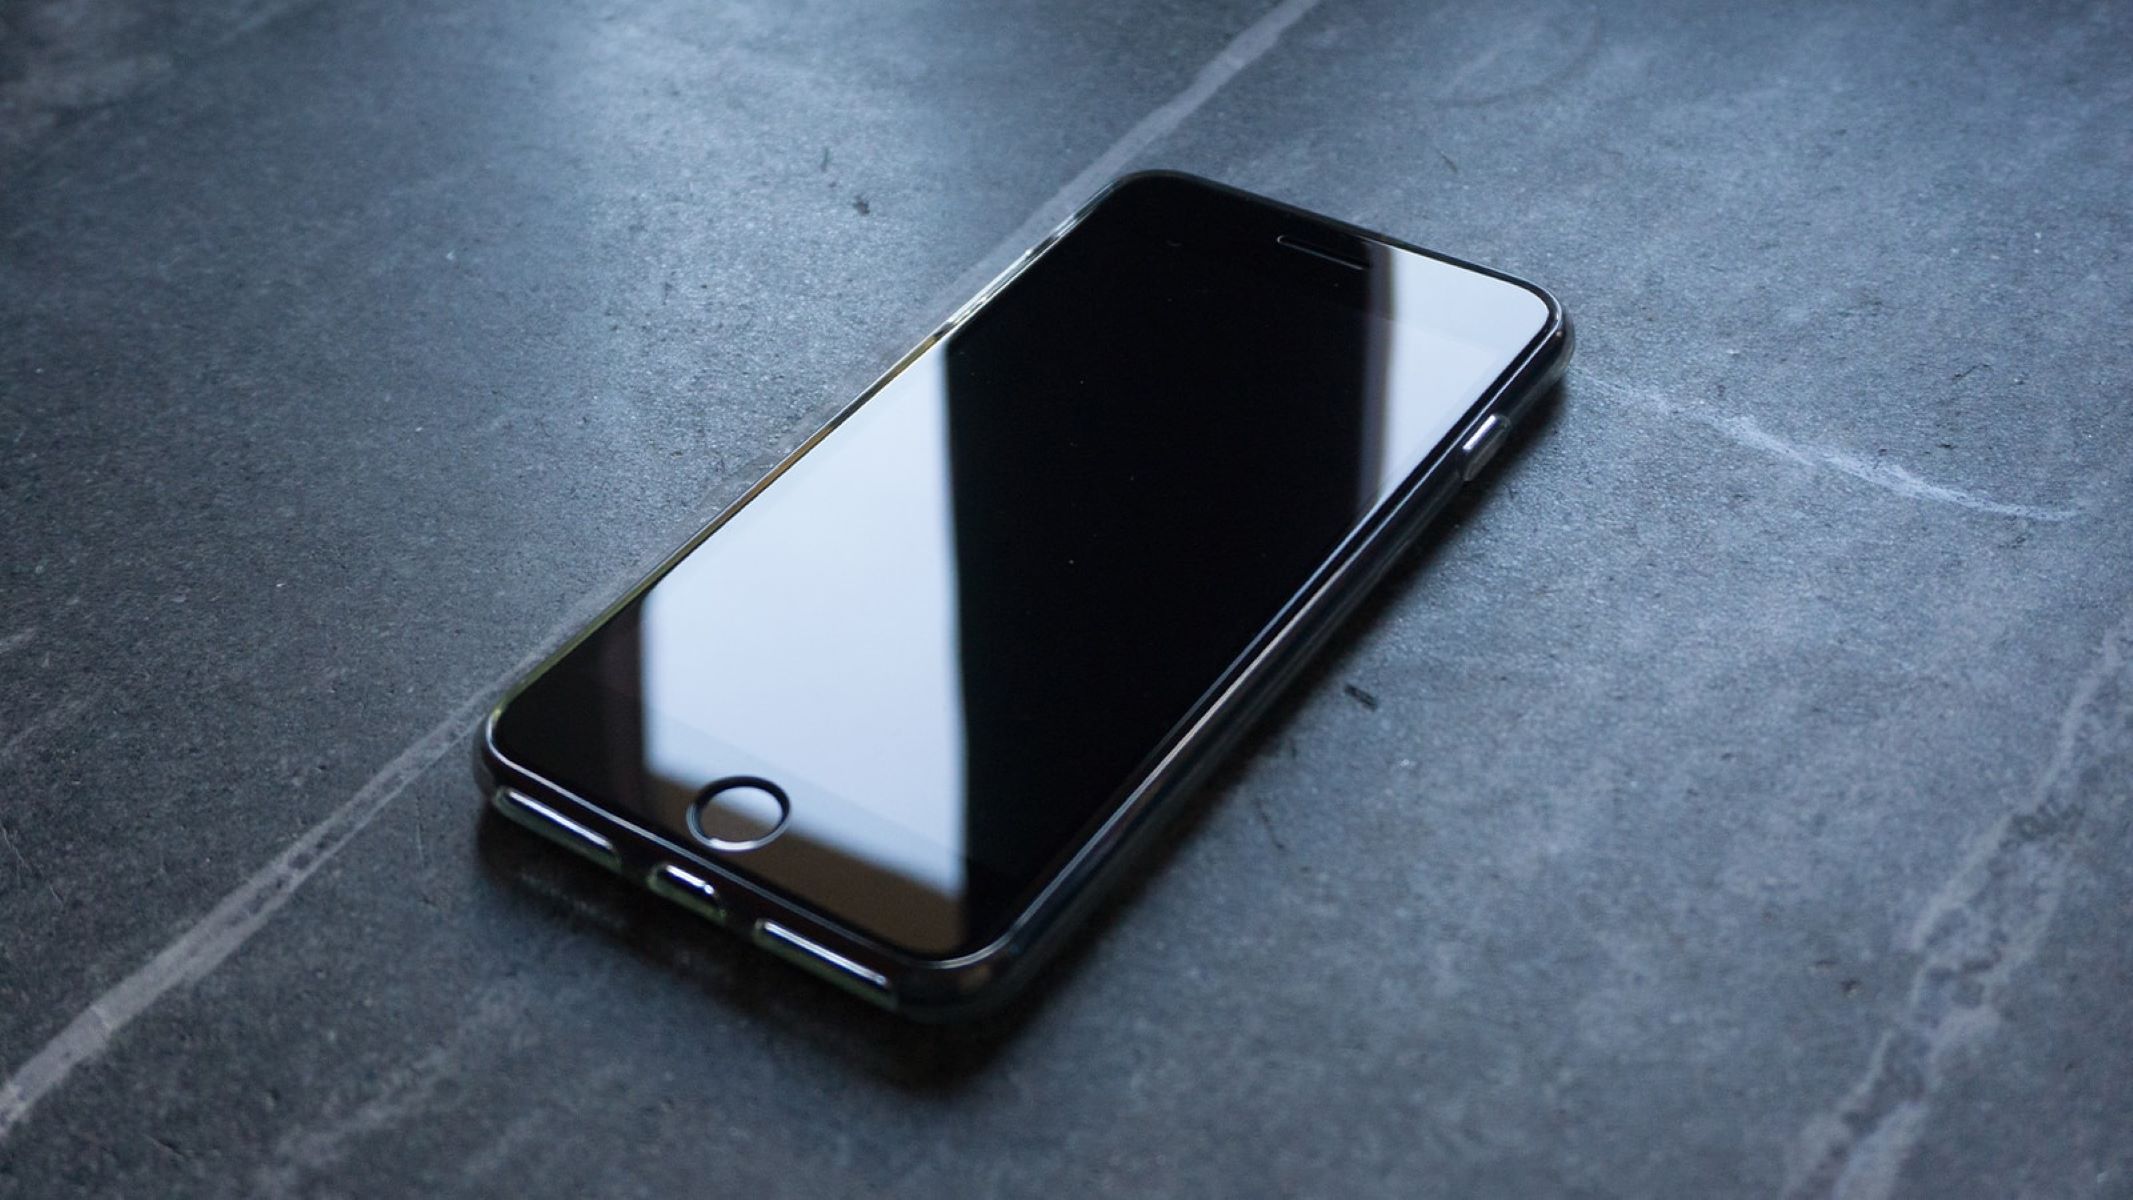 The Ultimate Guide To Detecting A Dead IPhone Or Turned Off Phone